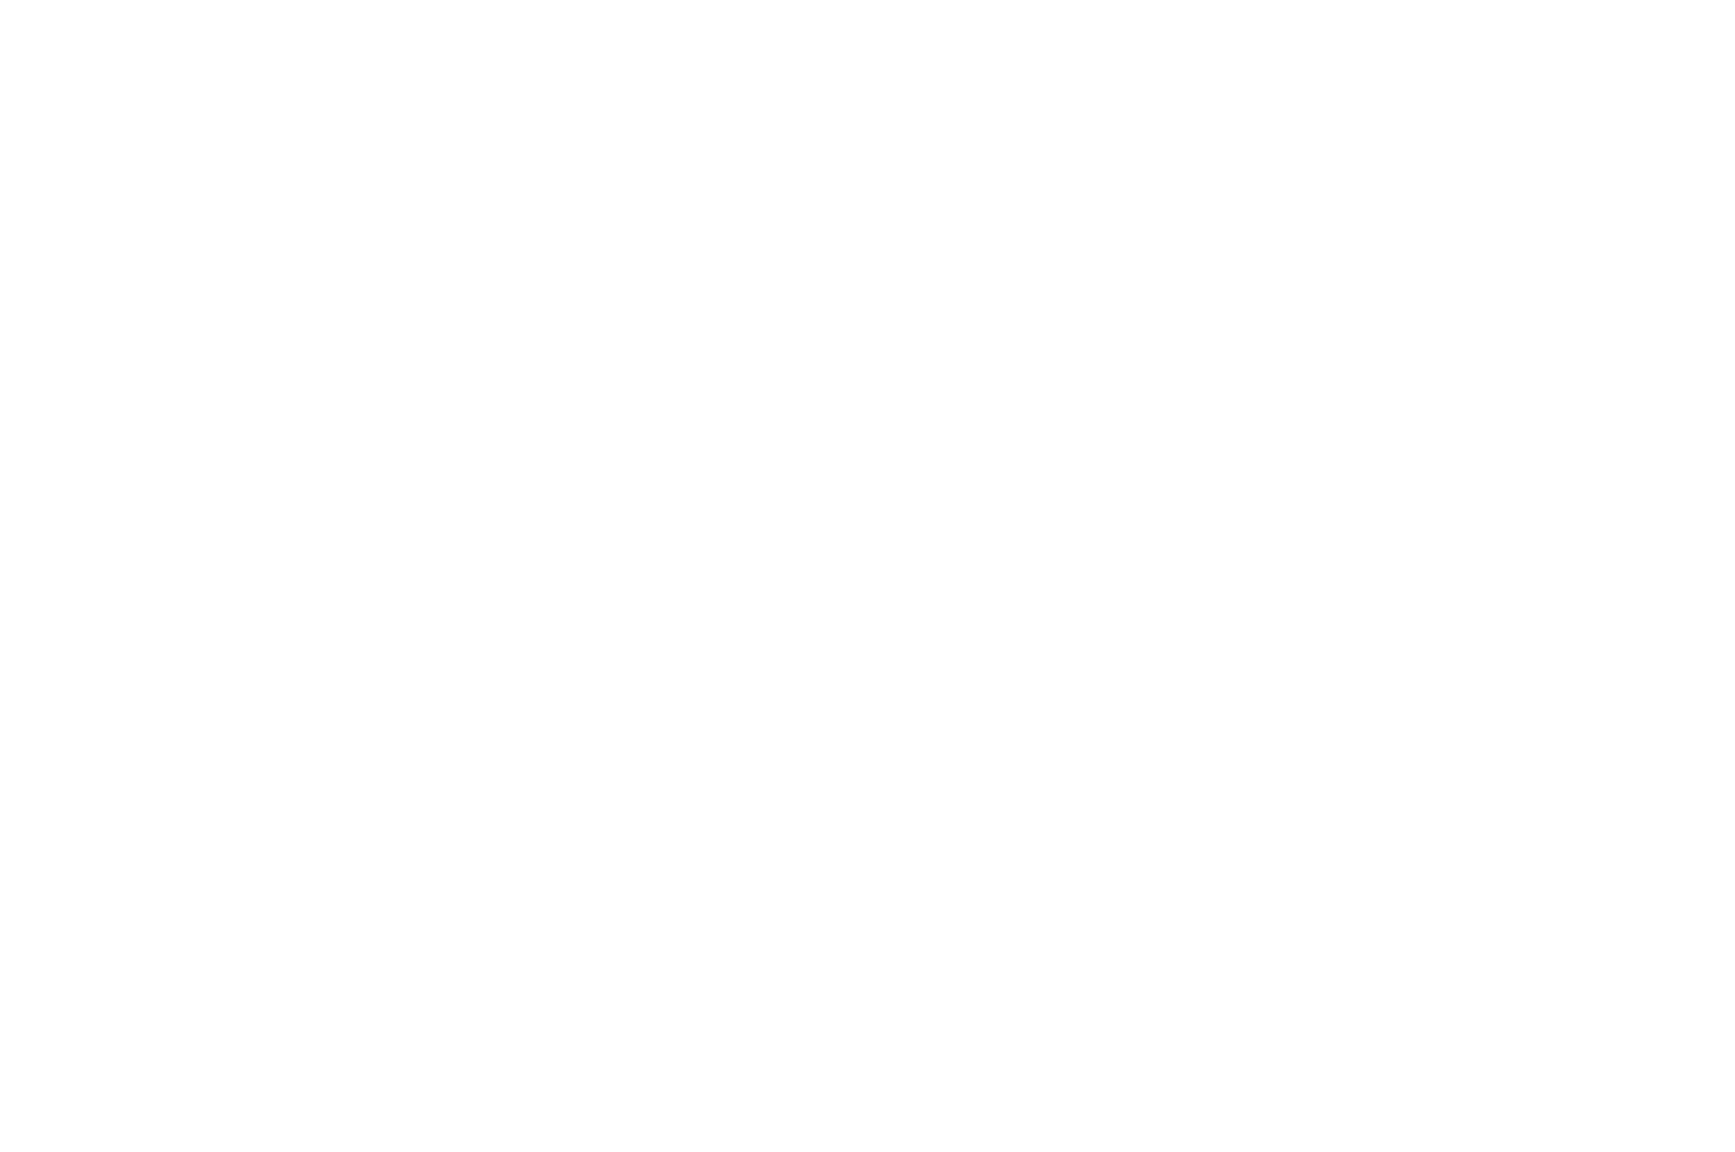 OFFICIAL SELECTION - Turnpike Film Festival - 2020-2.png